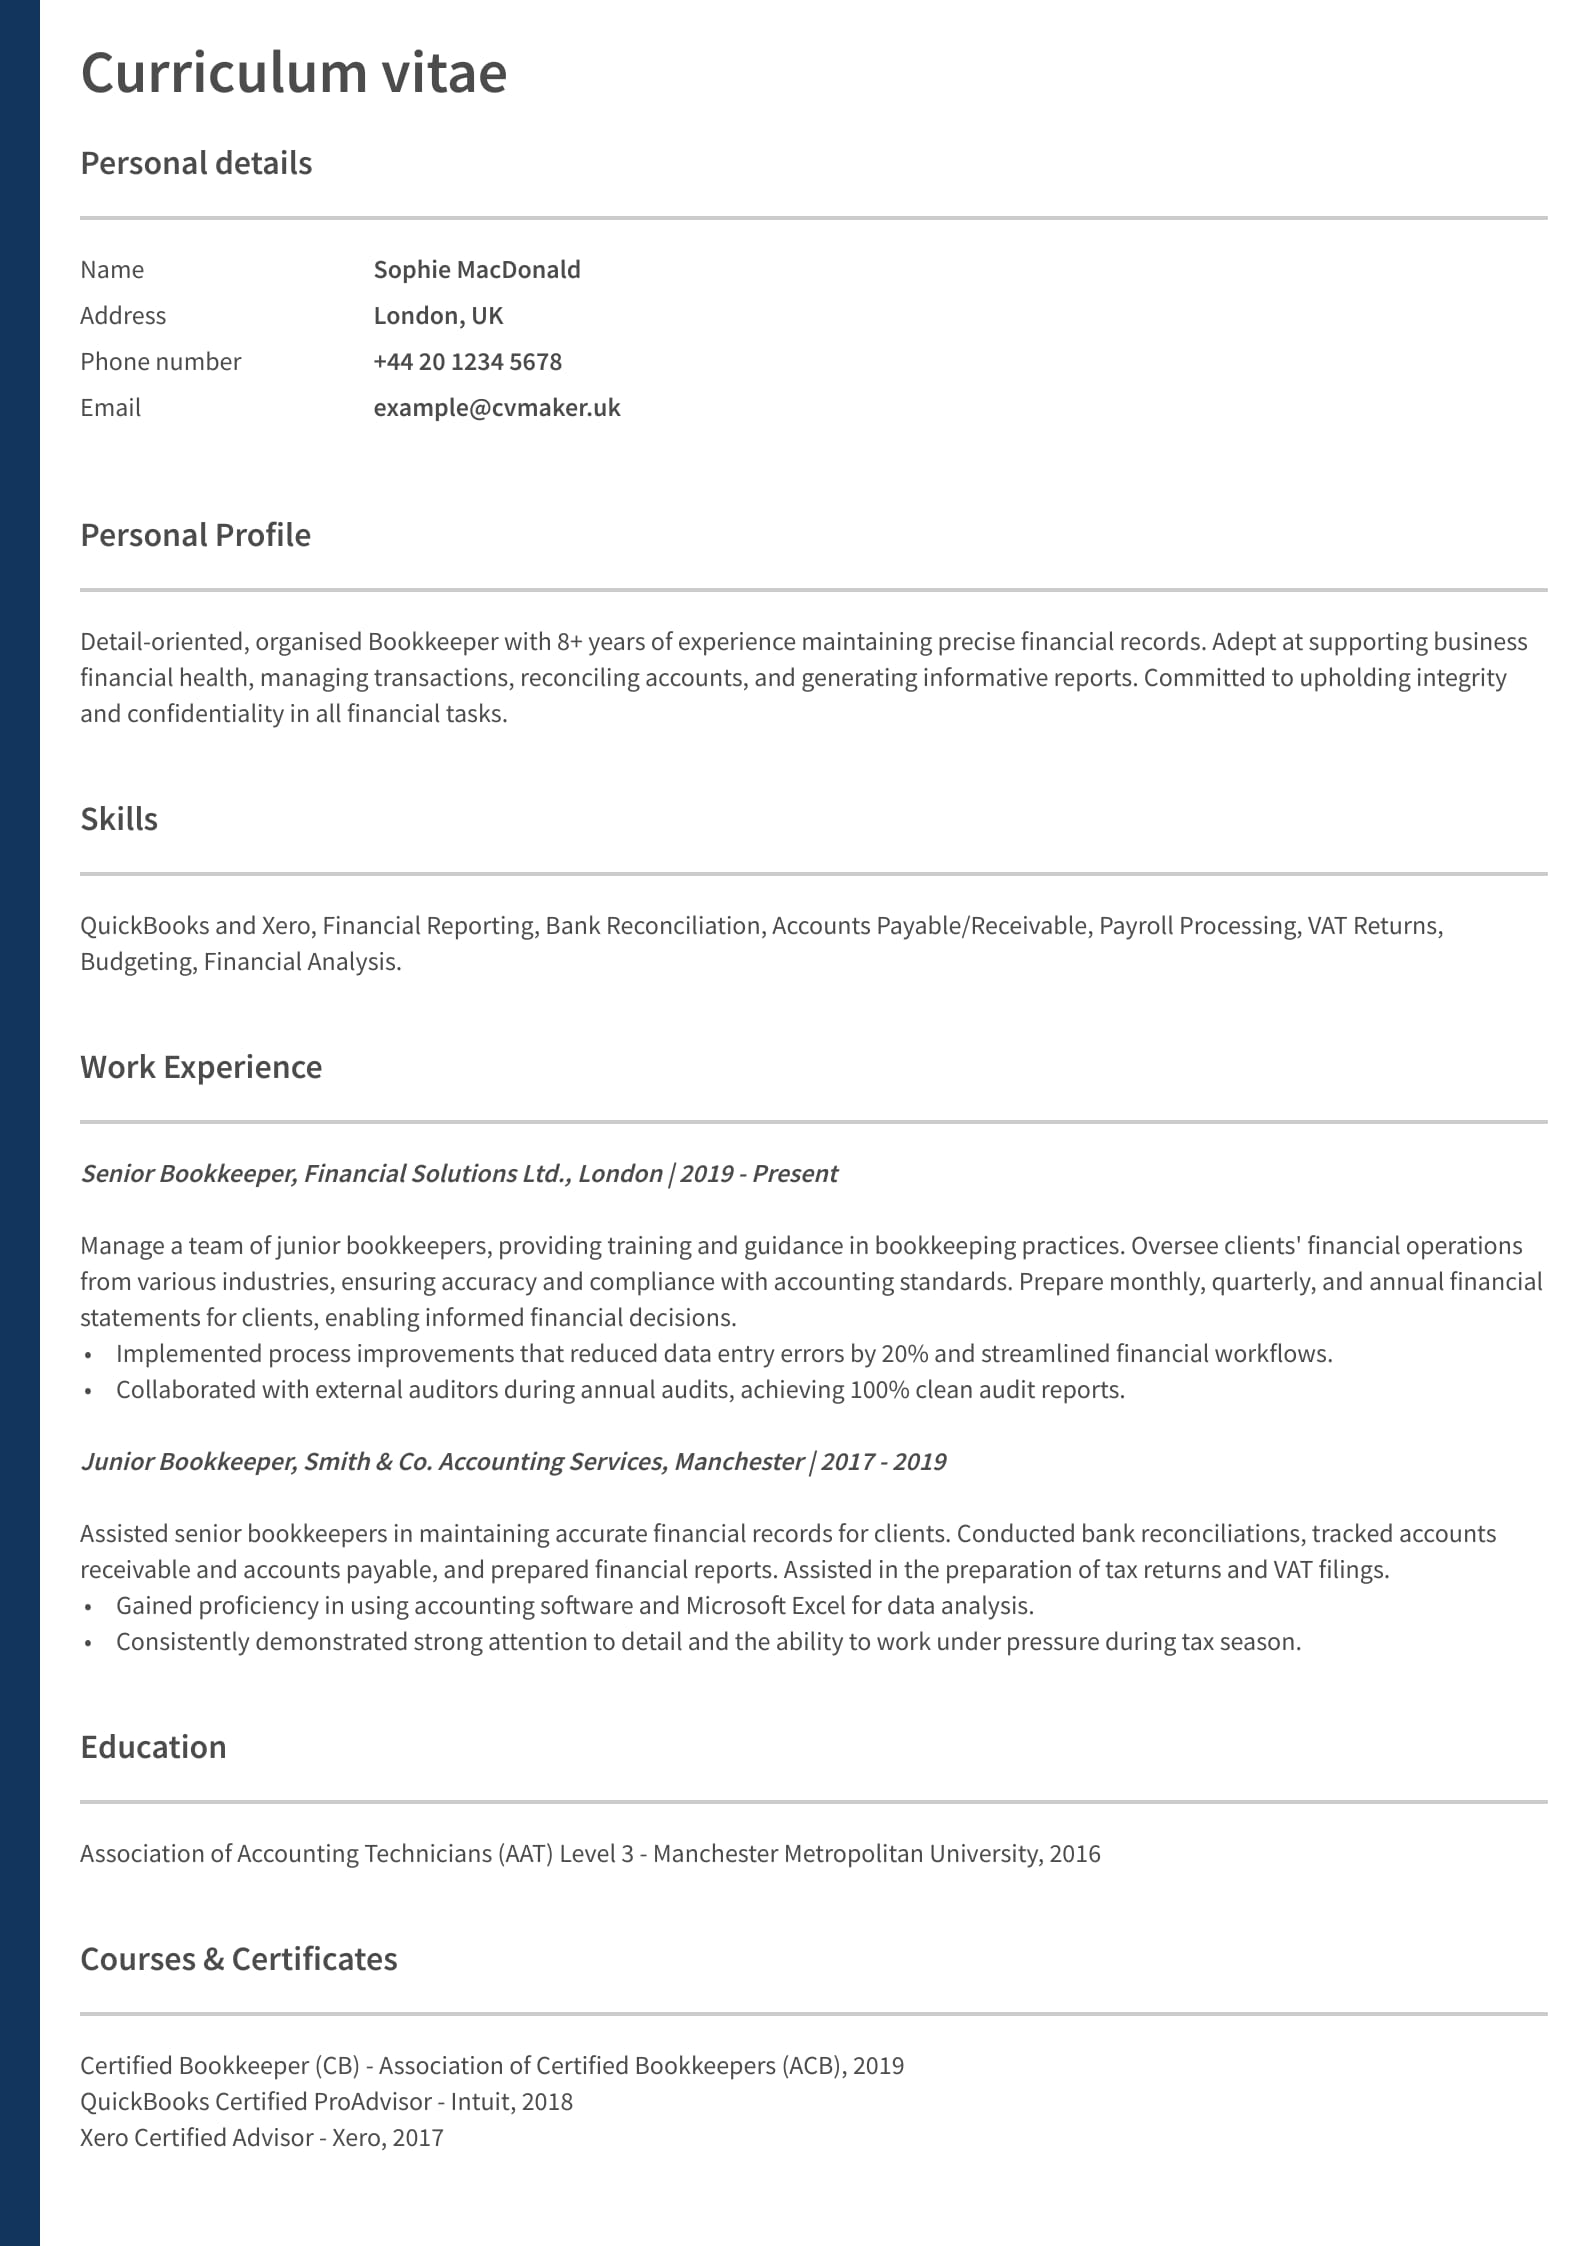 CV example - Bookkeeper - Oxford template